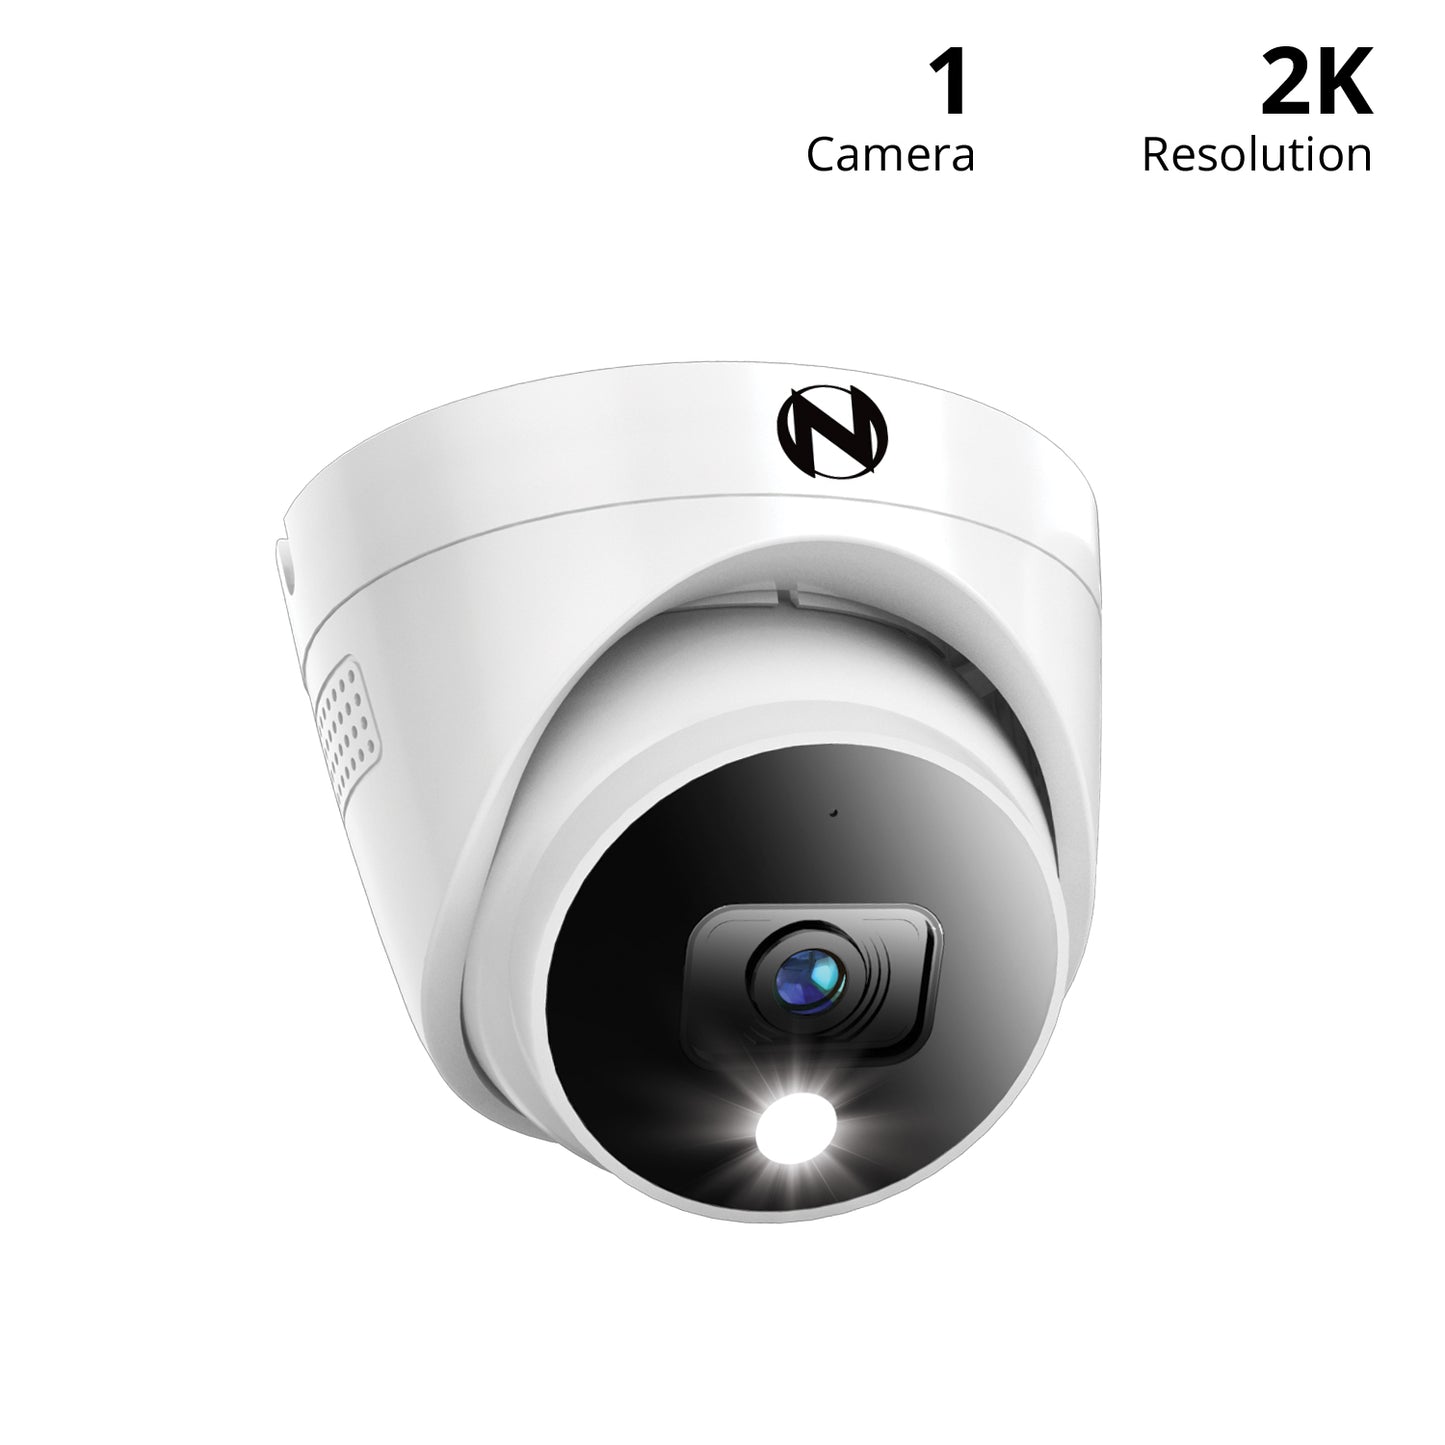 Add On Wired 2K Deterrence Dome Camera with 2-Way Audio - White - Camera Cable Not Included